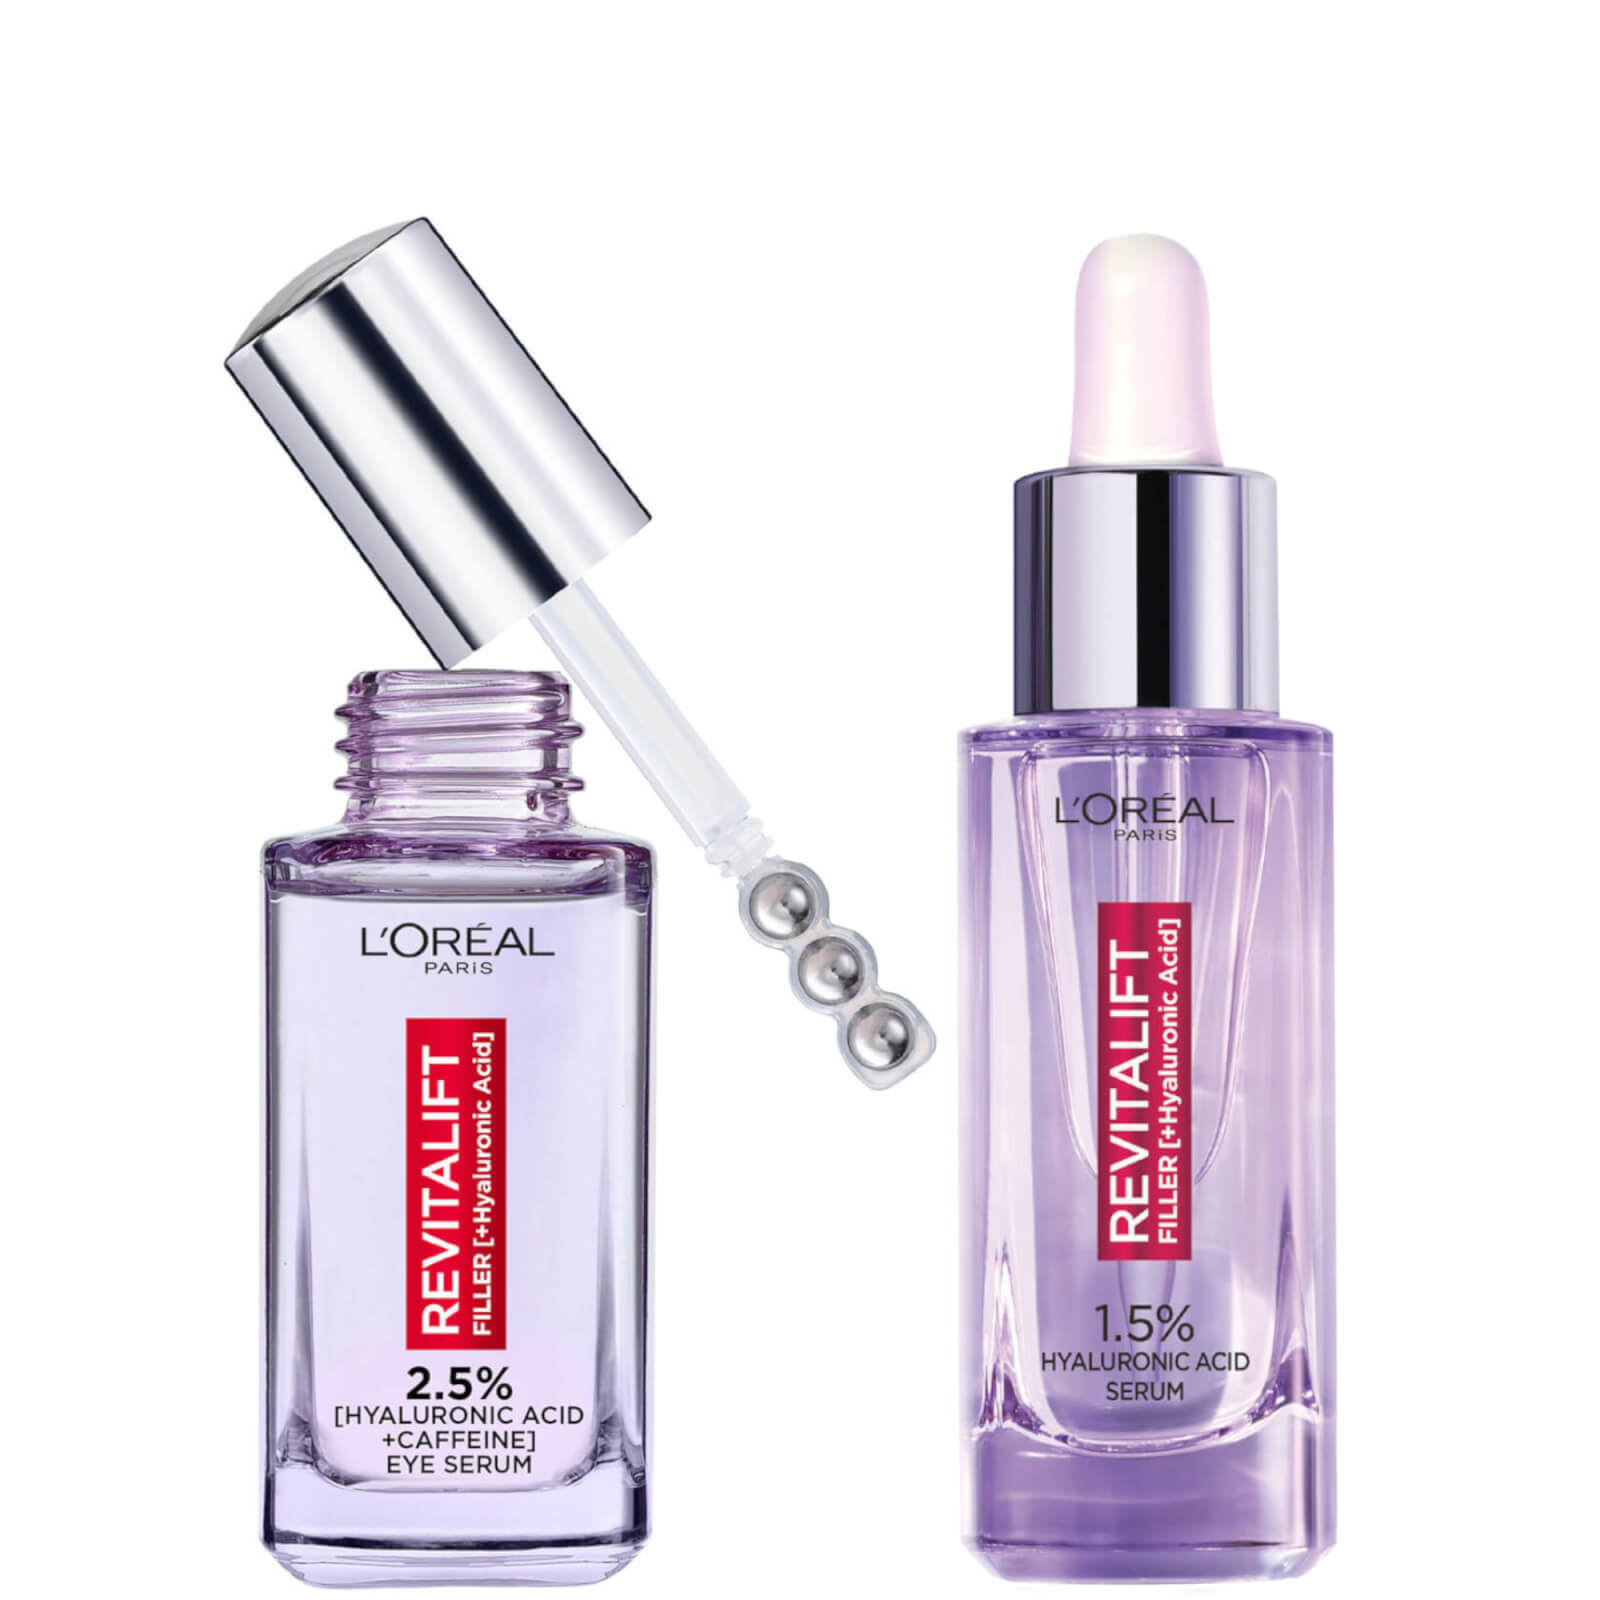 L'oréal Paris Hydration Heroes Face And Eye Serum Duo With Hyaluronic Acid And Caffeine In Purple